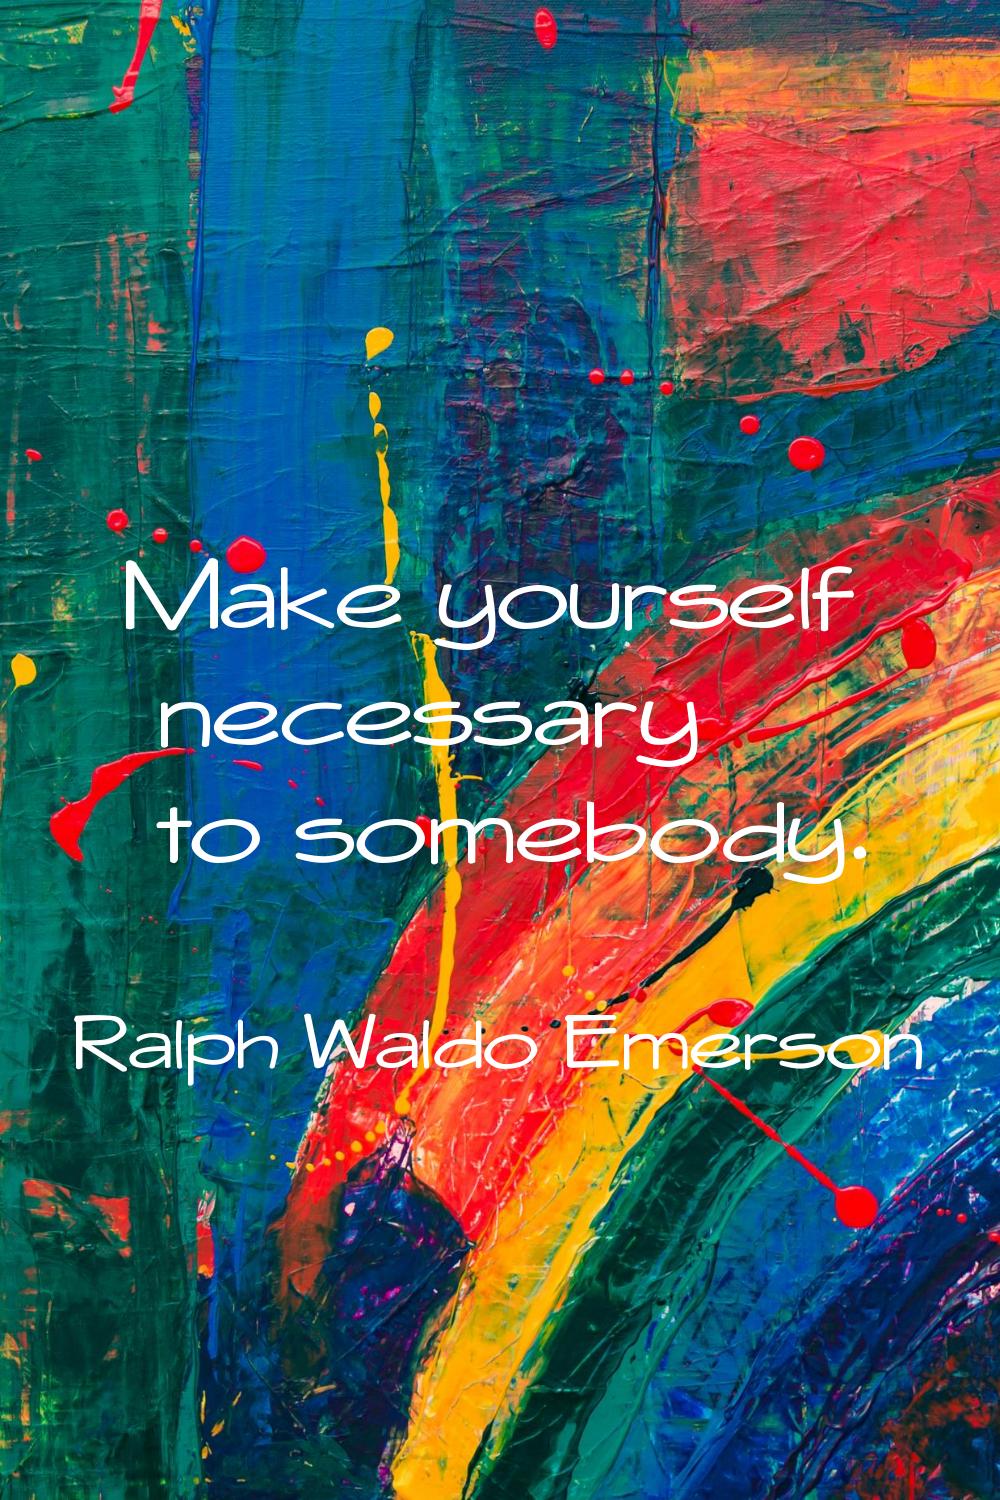 Make yourself necessary to somebody.